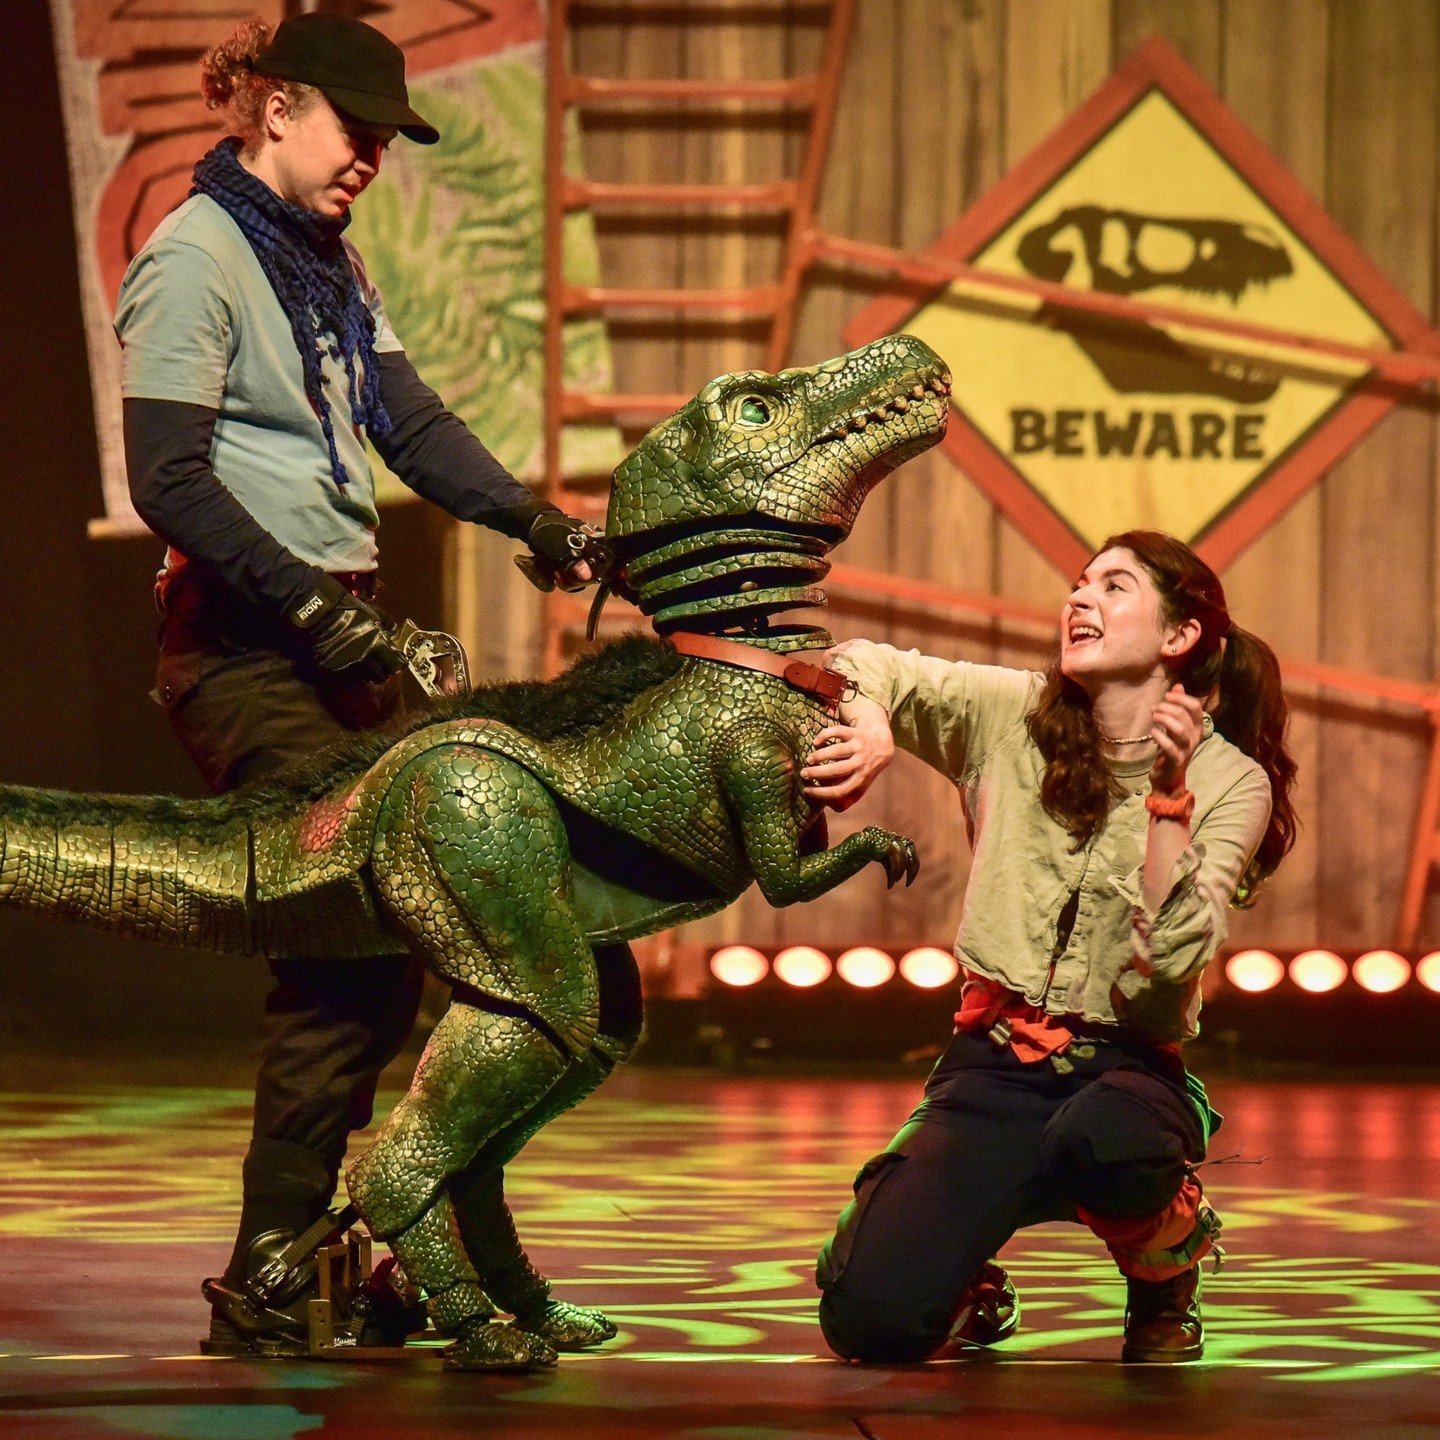 Get ready to have a T-Rexcellent time, in a show that defies the boundaries of puppetry! Described as &ldquo;Entertainment with showmanship, razzmatazz, and spectacular puppets&rdquo; (Behind the Arrias) Dinosaur World Live is brought to you by #ACPr